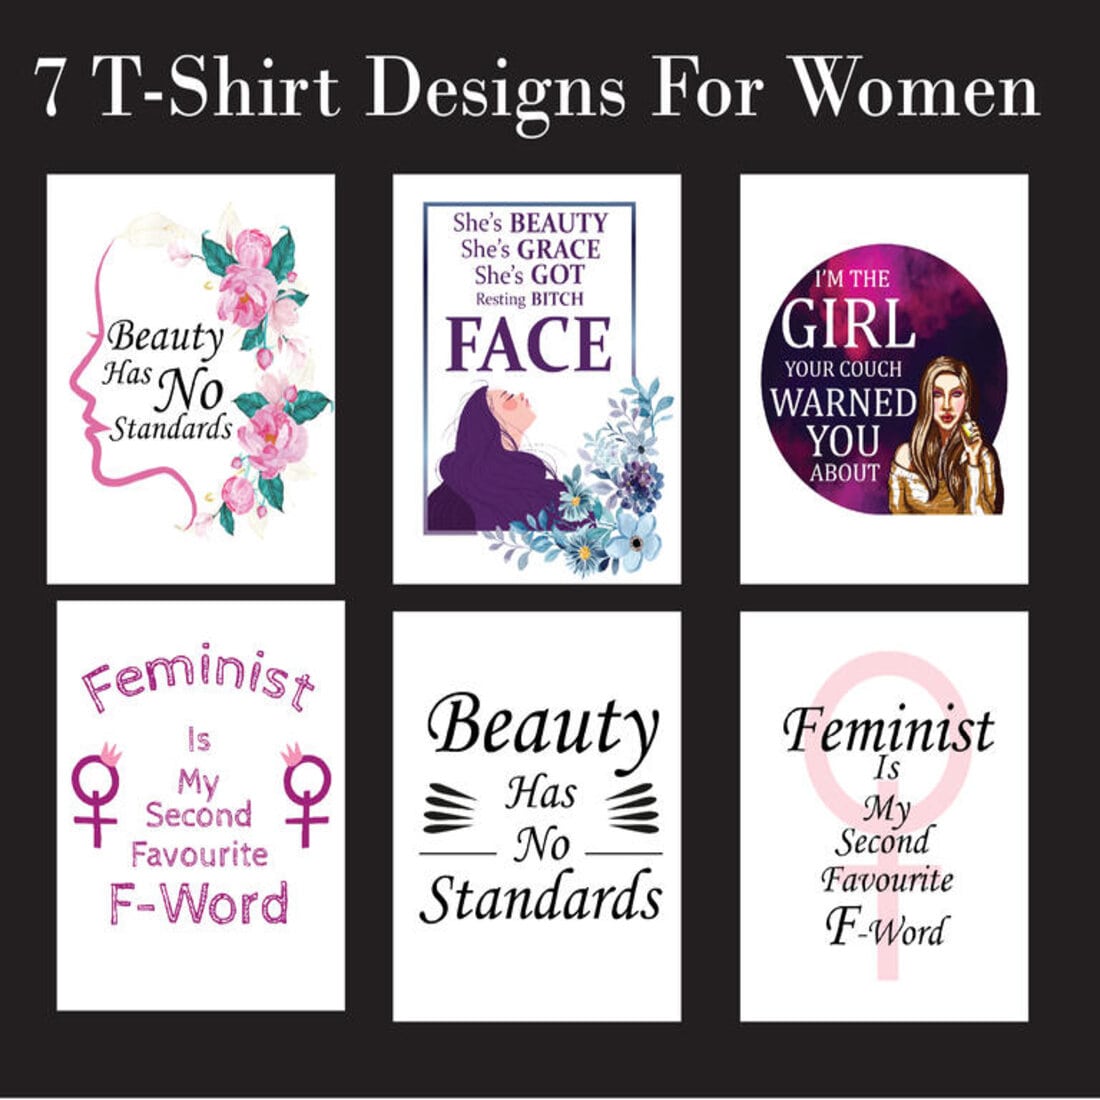 7 T-Shirt Designs For Women cover image.